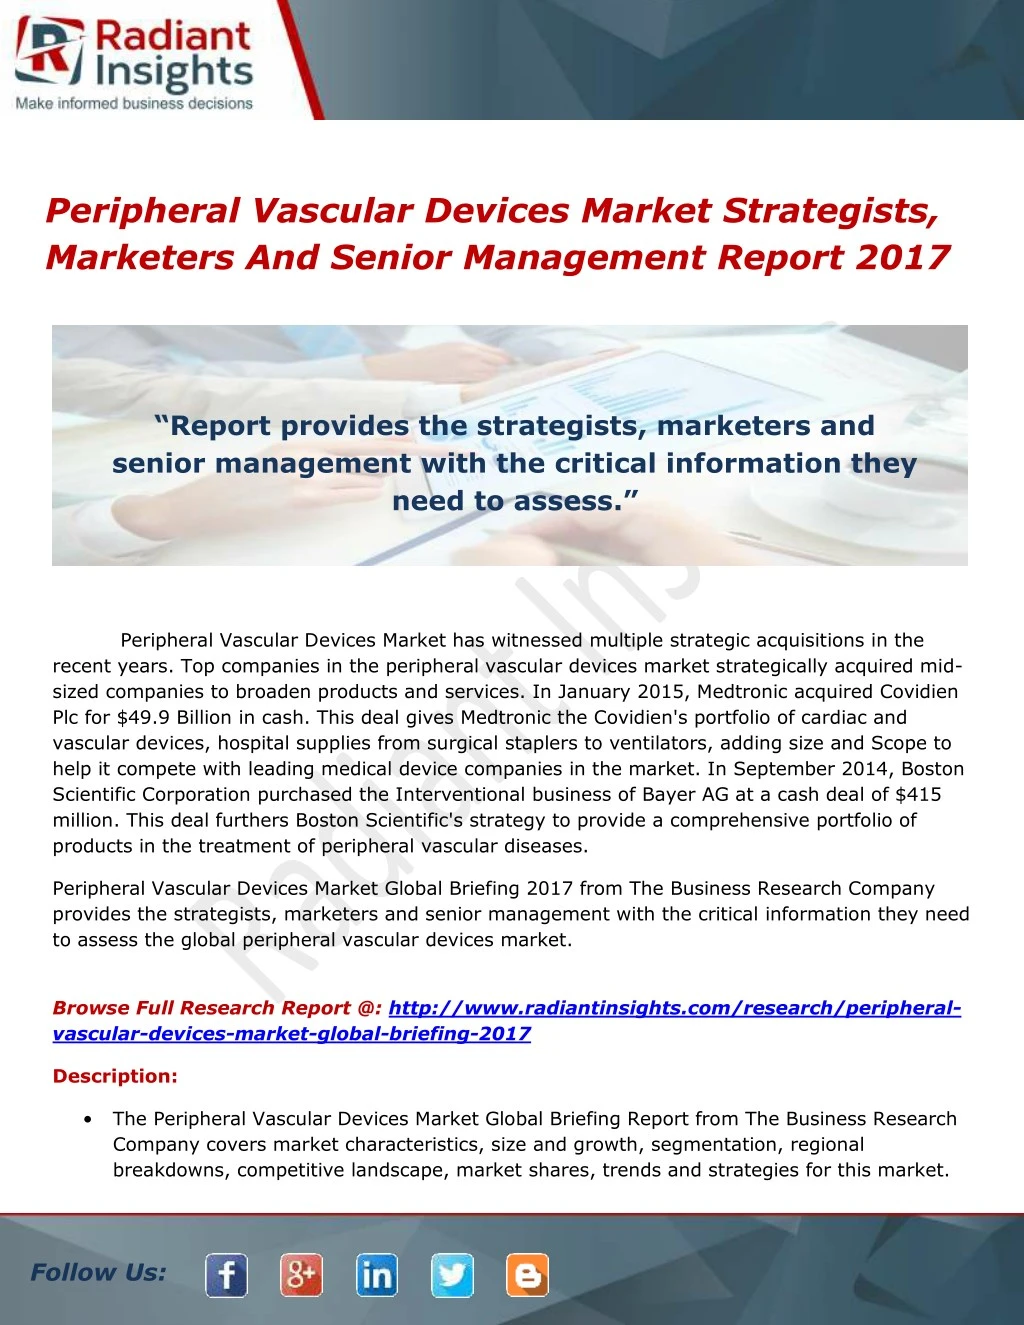 peripheral vascular devices market strategists